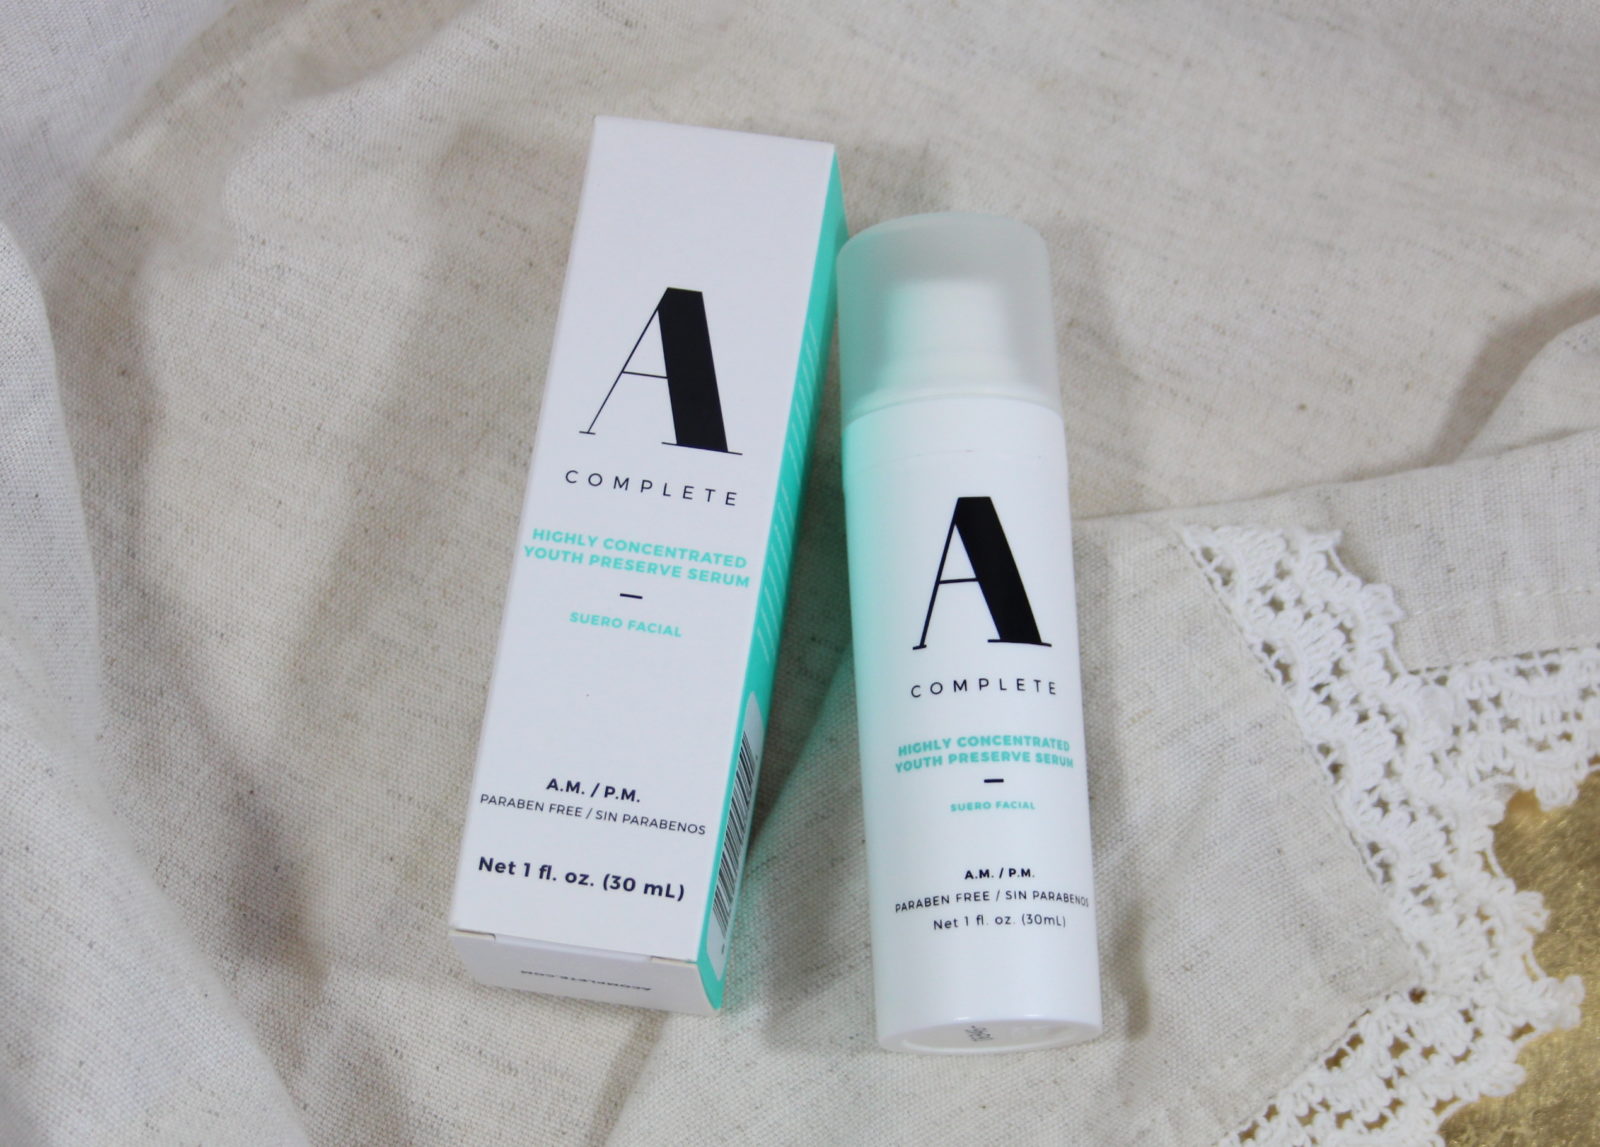 A Complete Highly Concentrated Youth Preserve Serum